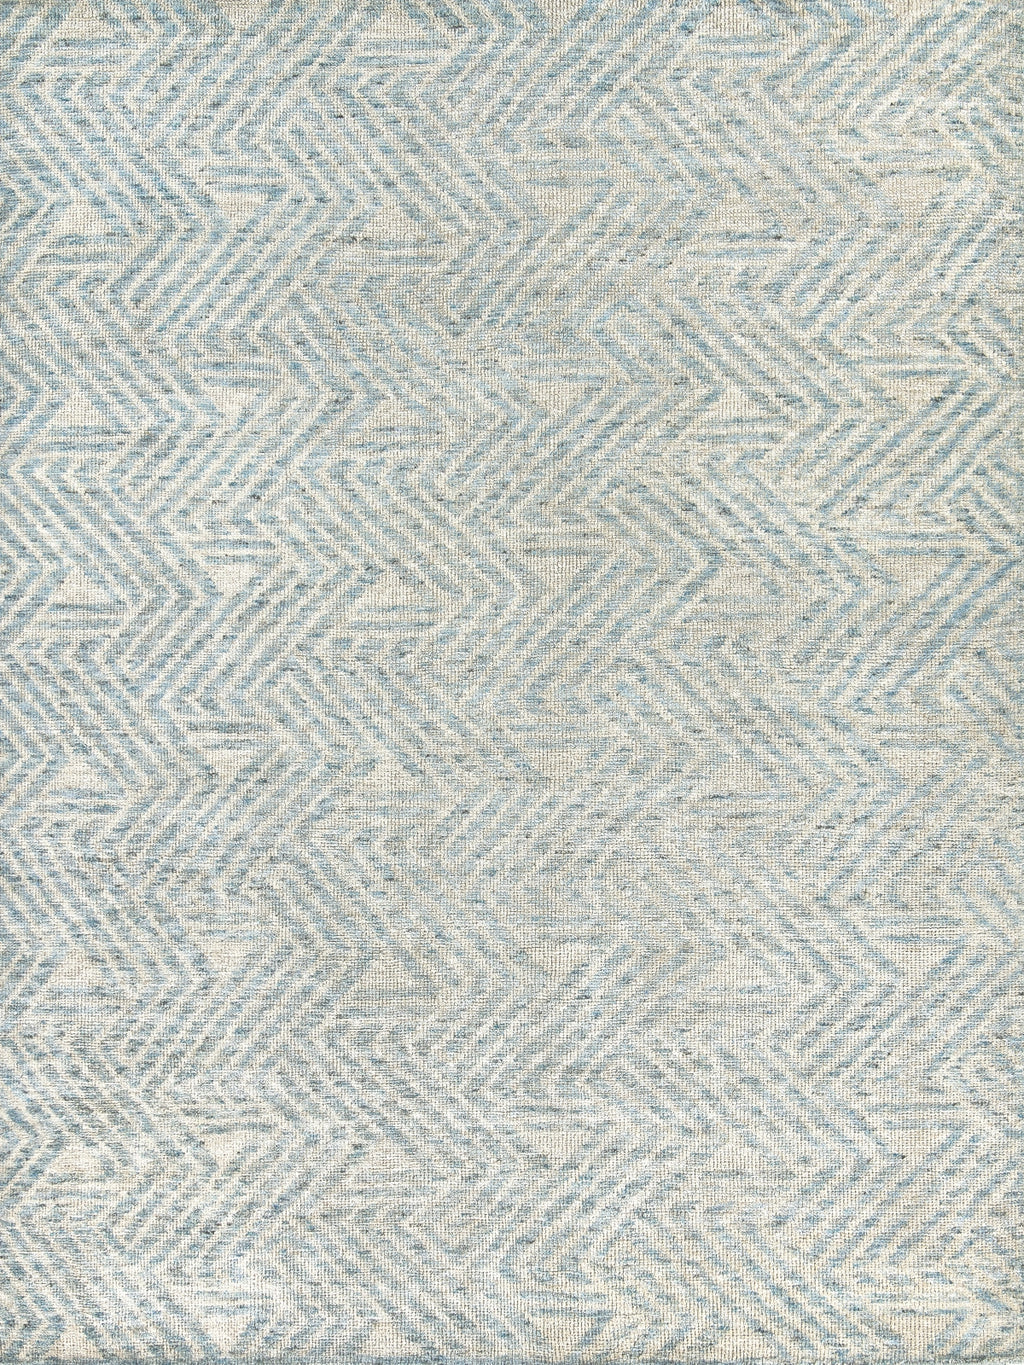 Exquisite Rugs Eaton 4038 Ivory/Blue Area Rug